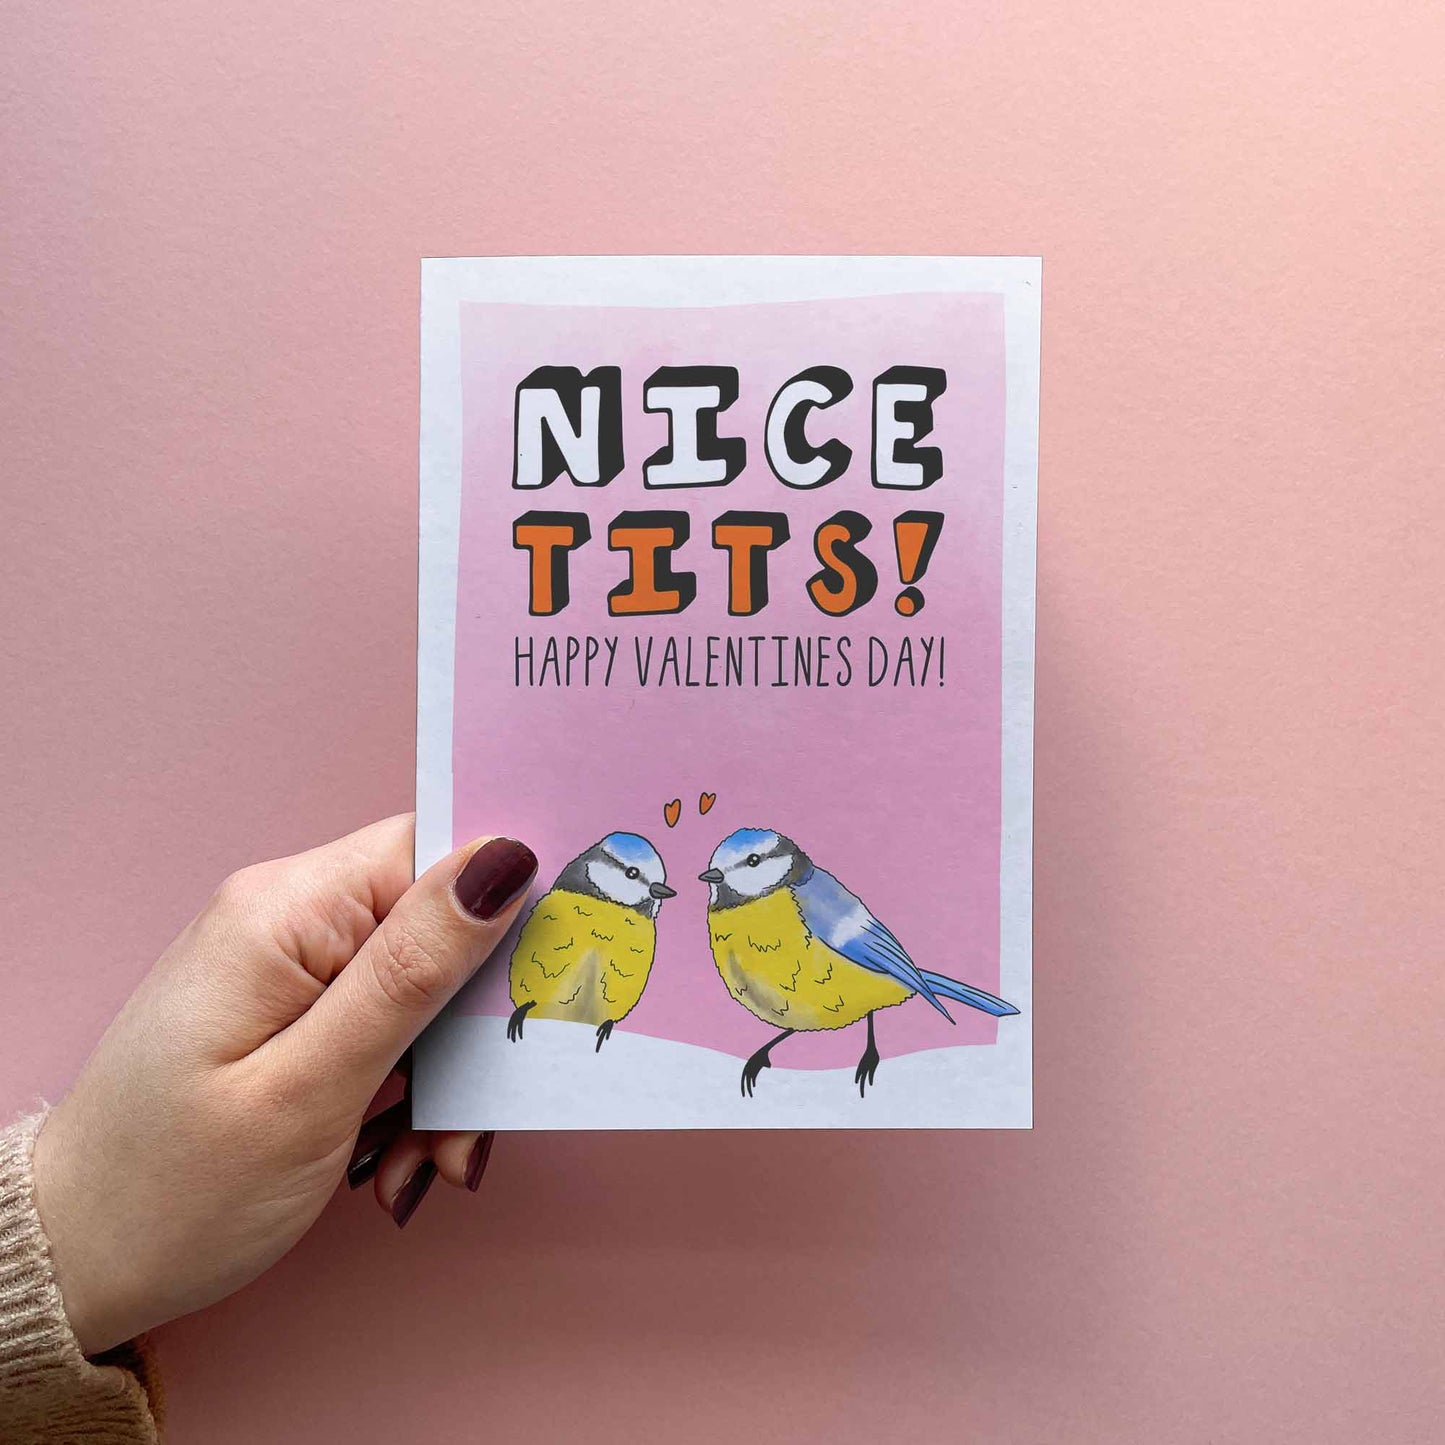 Nice Tits - Funny Valentine's Day Card